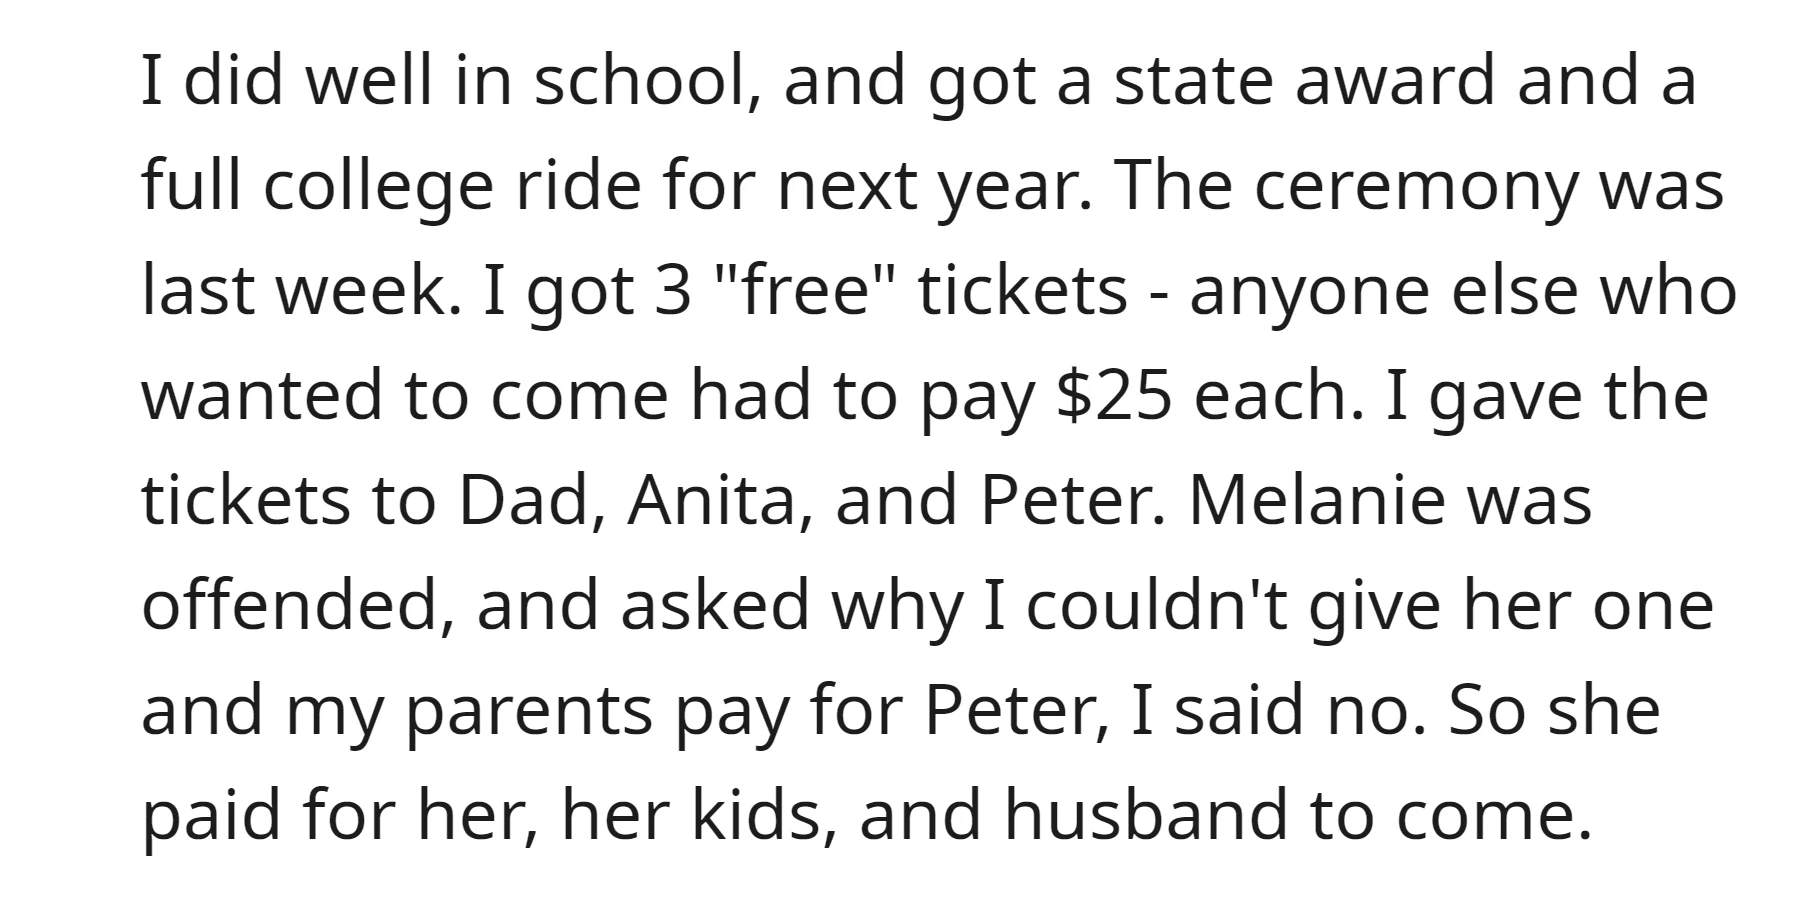 OP gave his three complimentary ceremony tickets to his dad, his step mom, and step brothe